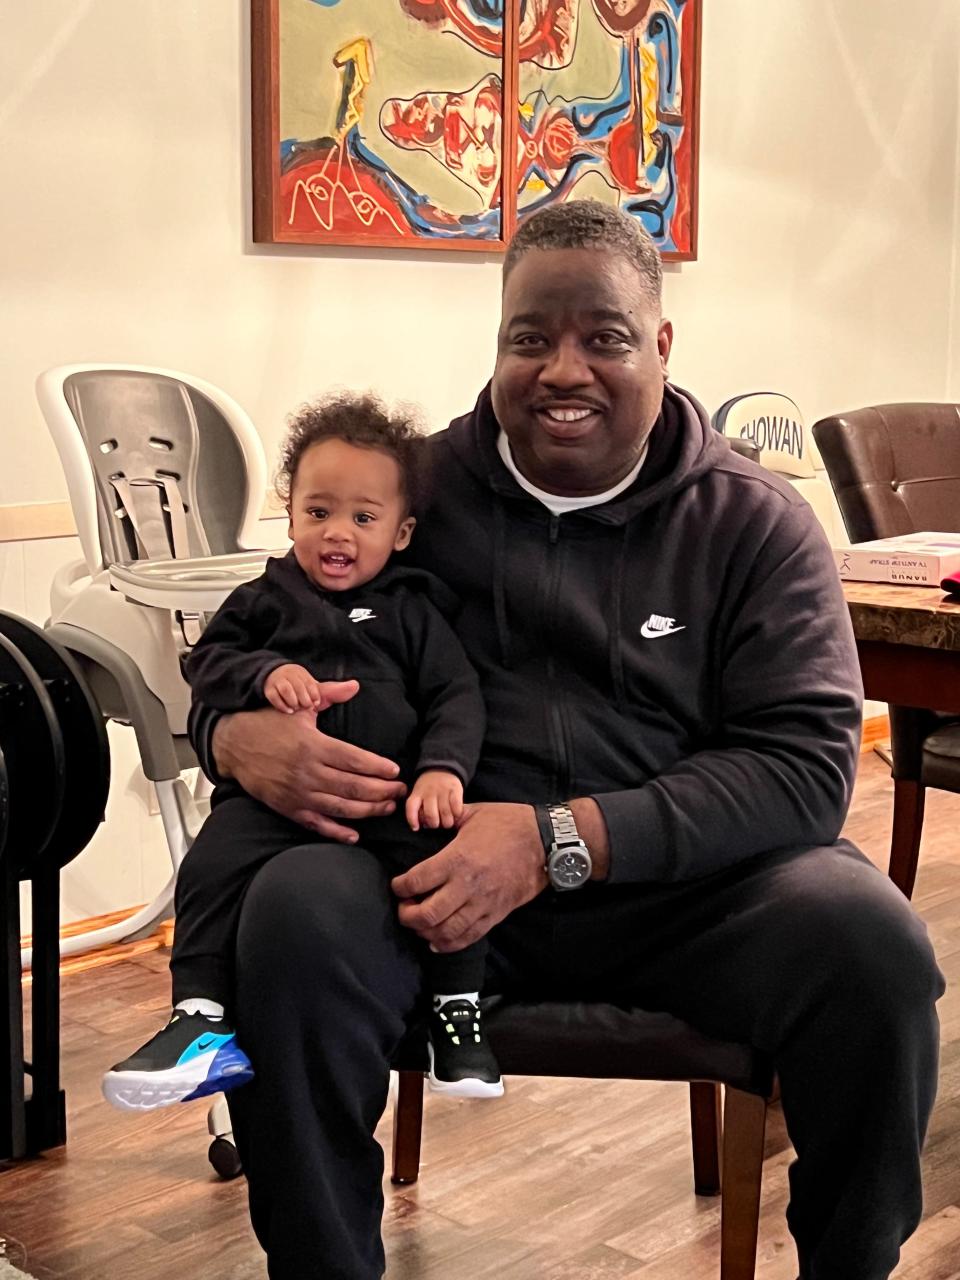 Illya McGee, right, holds his nephew Illya McGee. The younger Illya is the son of Willie McGee, who is a younger brother to the older Illya.